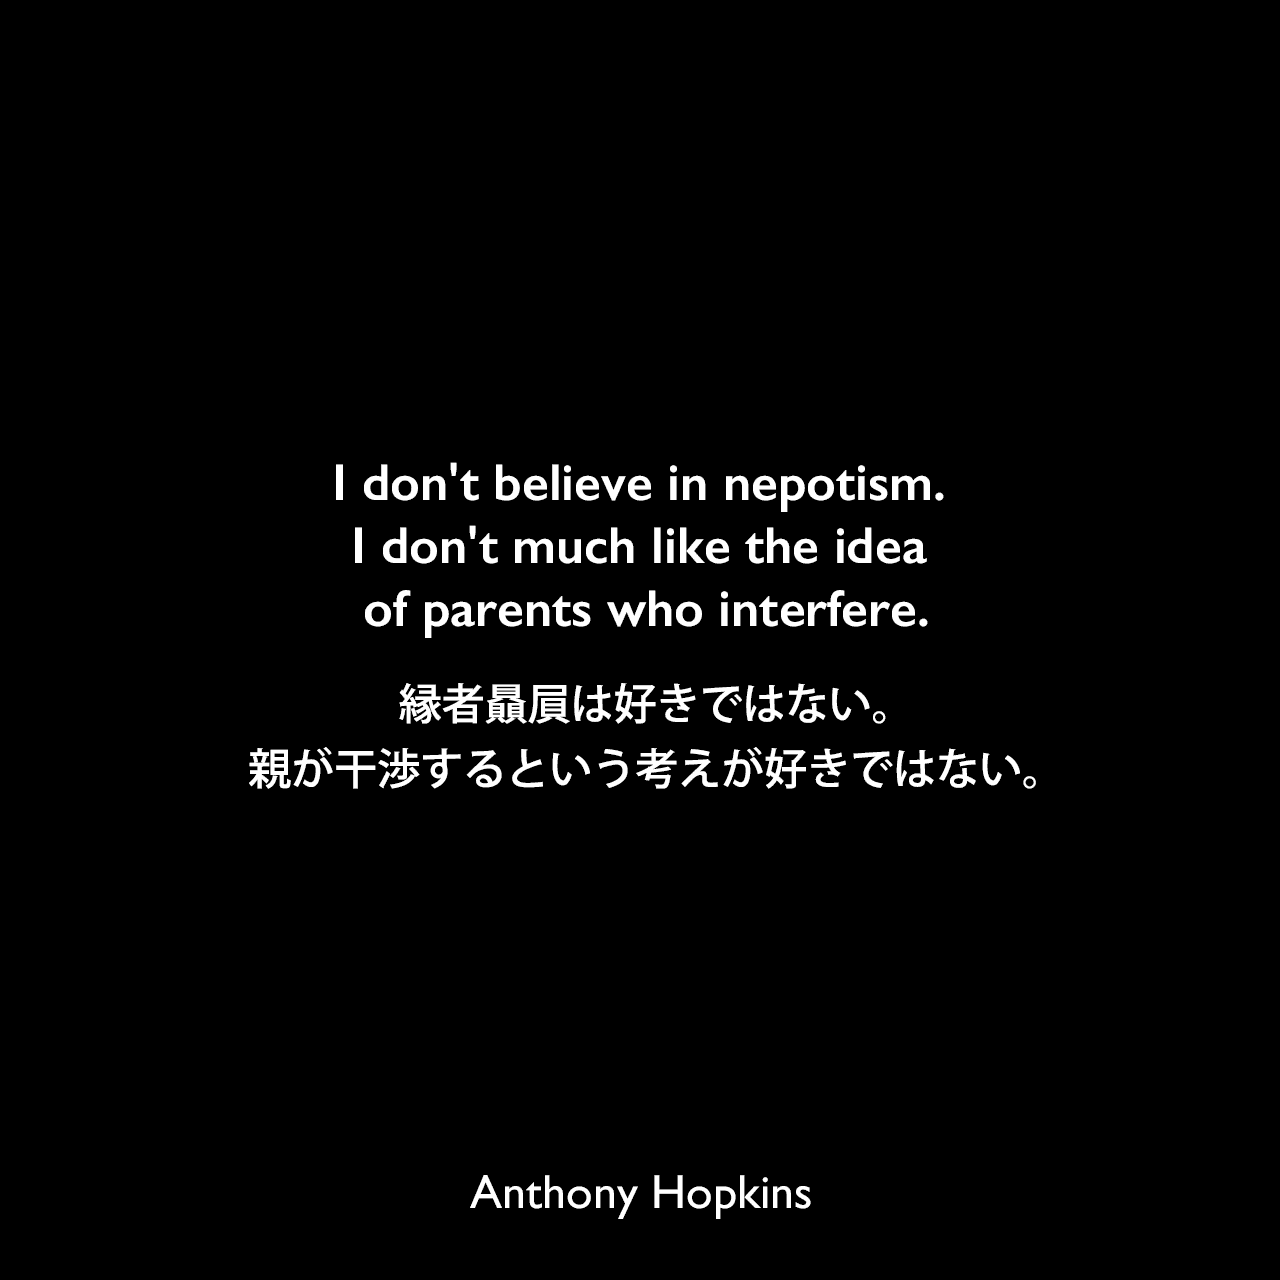 I don't believe in nepotism. I don't much like the idea of parents who interfere.縁者贔屓は好きではない。親が干渉するという考えが好きではない。Anthony Hopkins